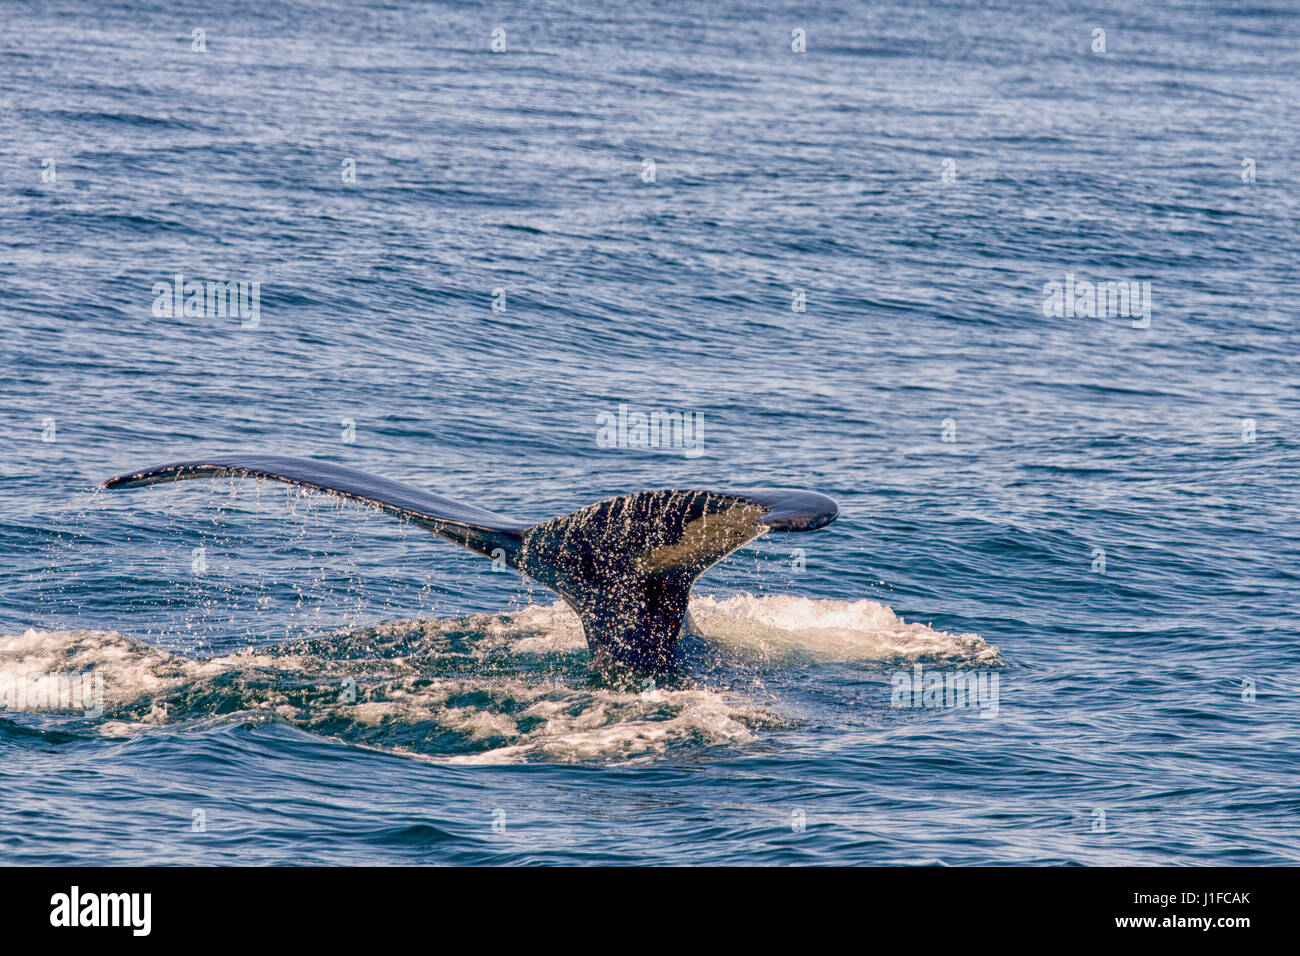 Fin of whale coming out of ocean Stock Photo